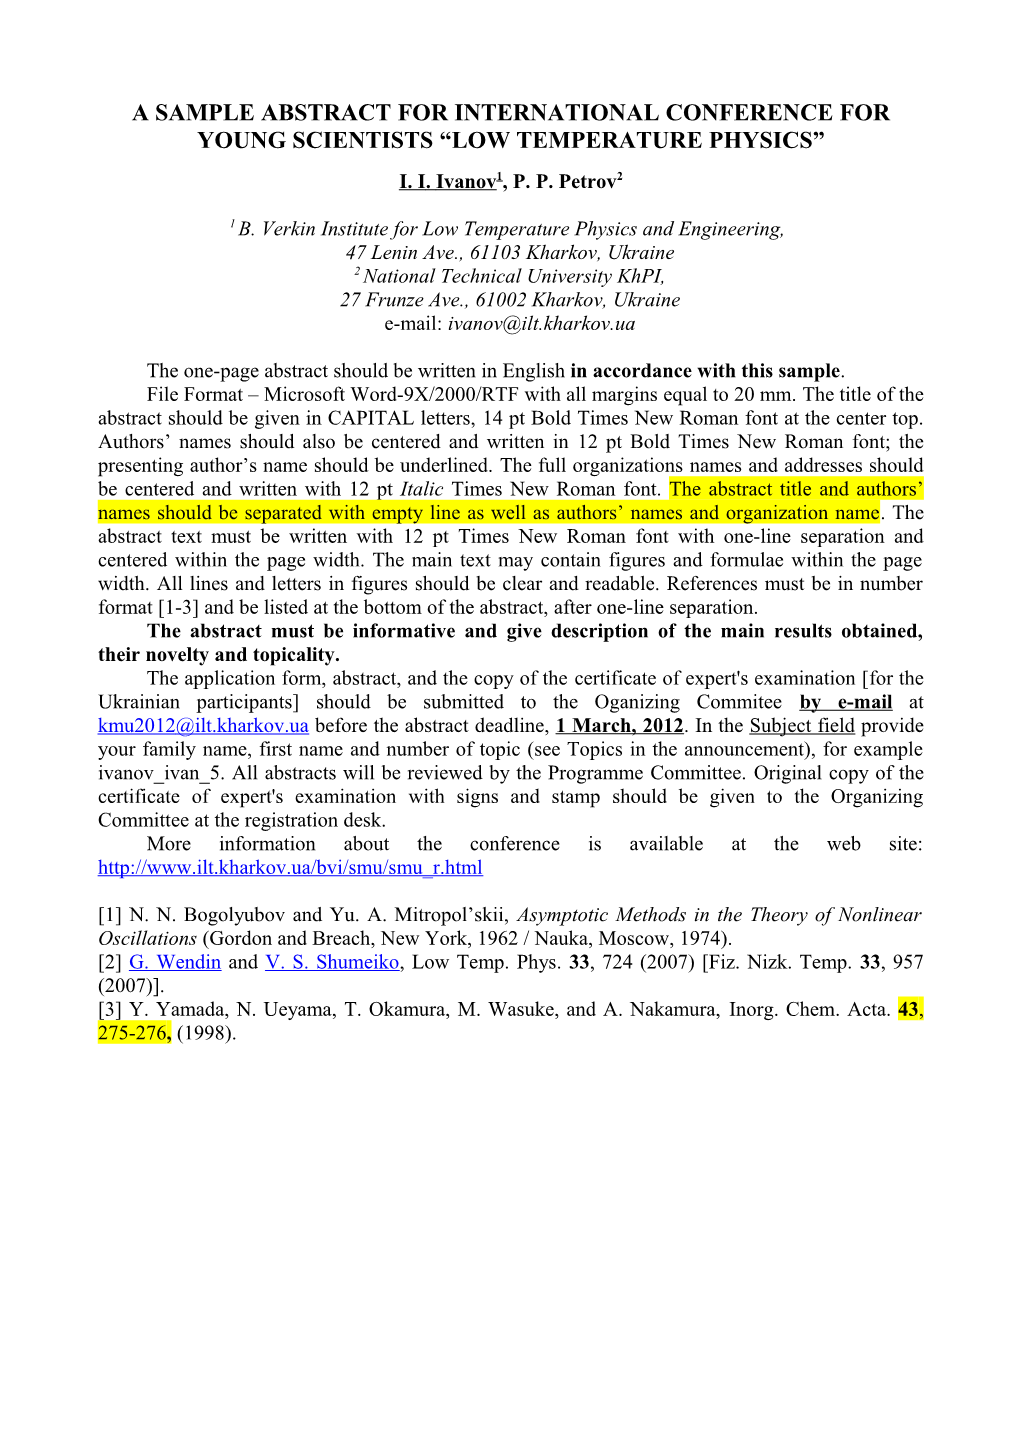 A Sample Abstract for International Conference for Young Scientists Low Temperature Physics